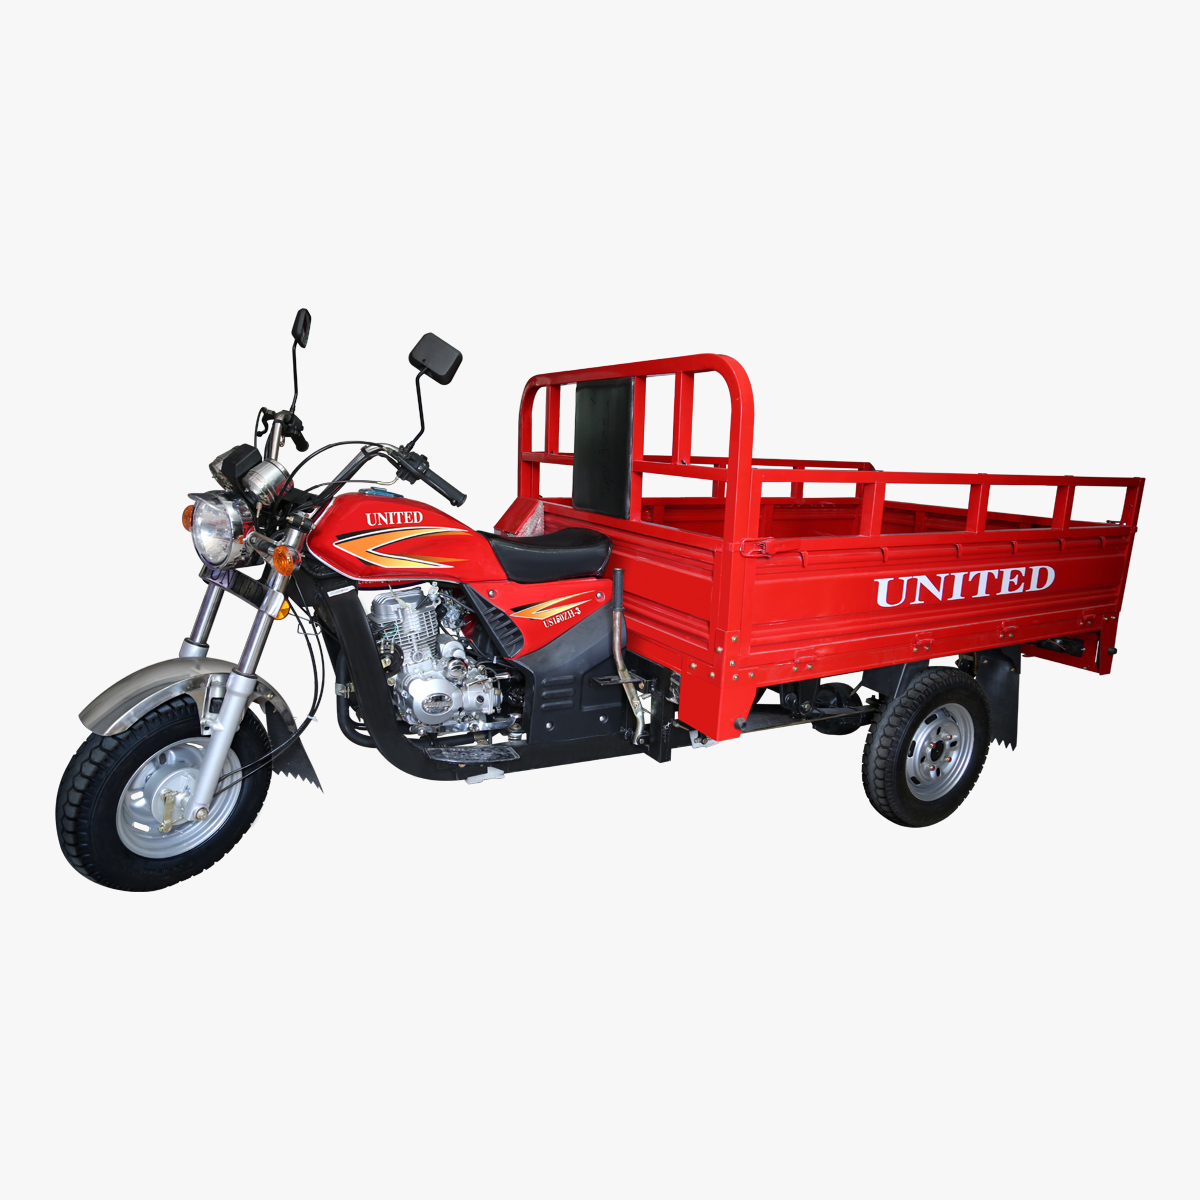 United Loader 150cc Rickshaw Mileage Specification Features